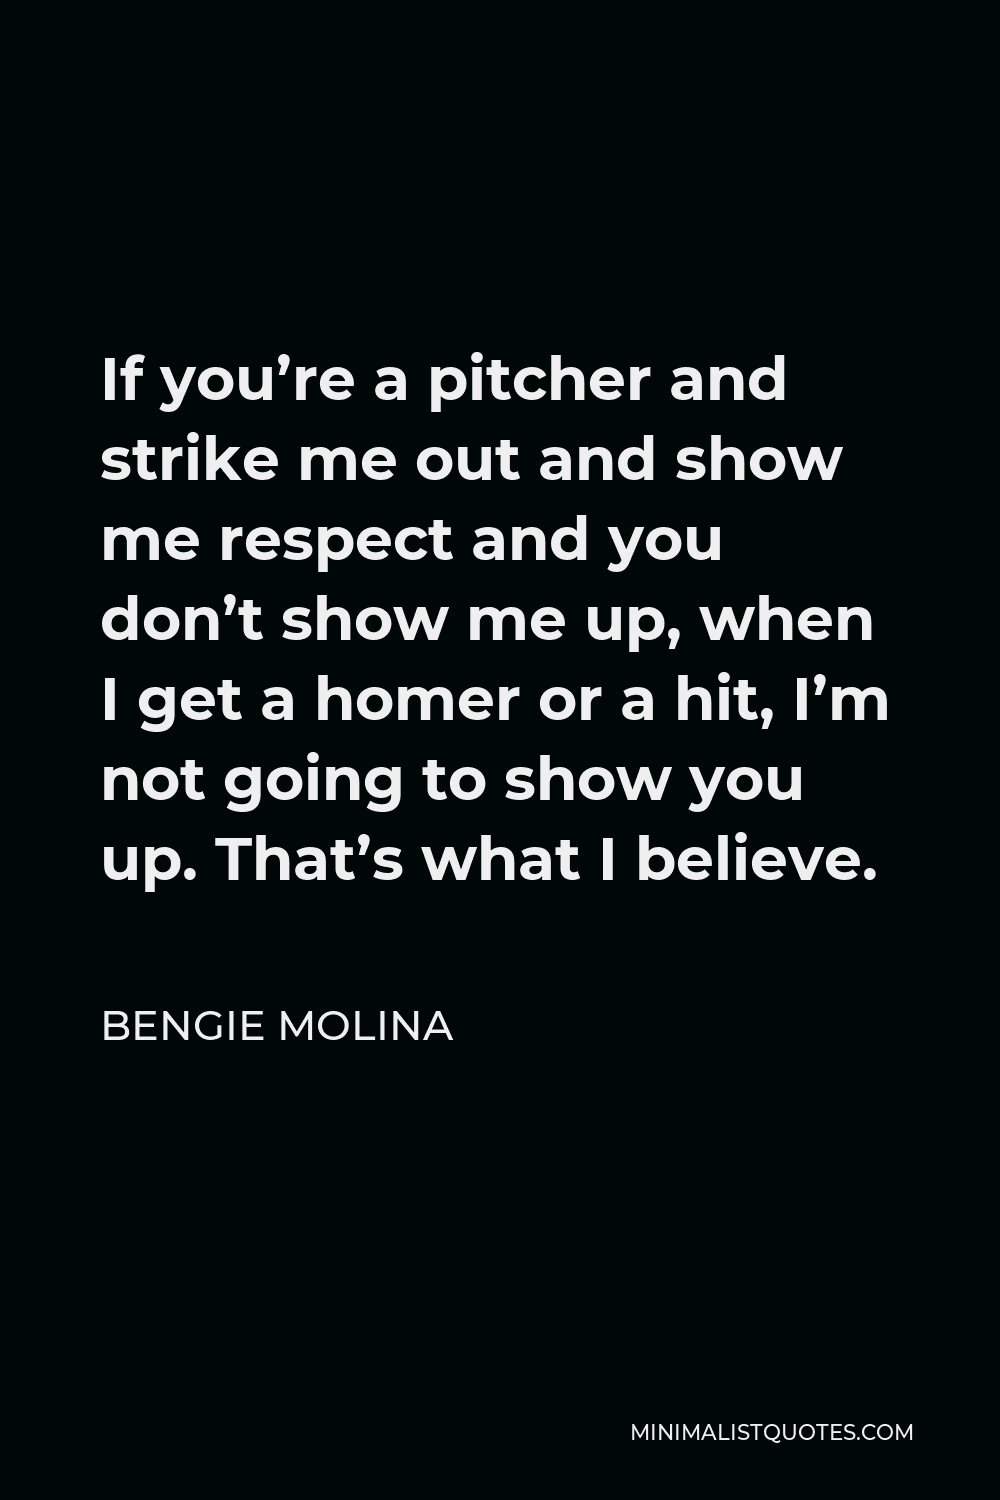 Bengie Molina Quote - If you’re a pitcher and strike me out and show me respect and you don’t show me up, when I get a homer or a hit, I’m not going to show you up. That’s what I believe.